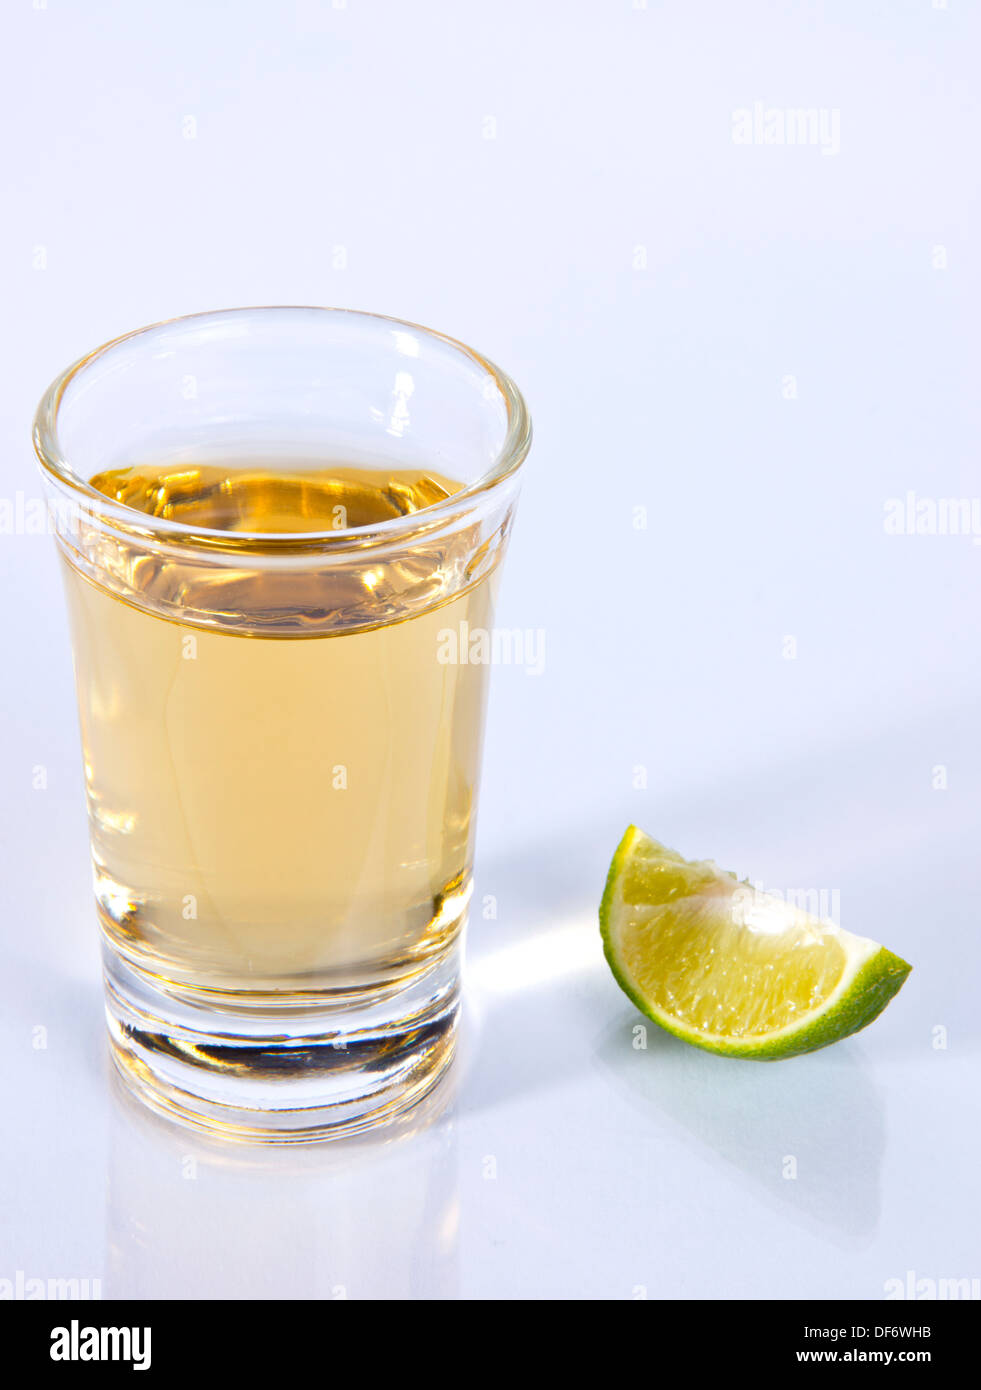 Tequila Shot with Quarter Green Lime on Reflective Foreground and White Background Stock Photo